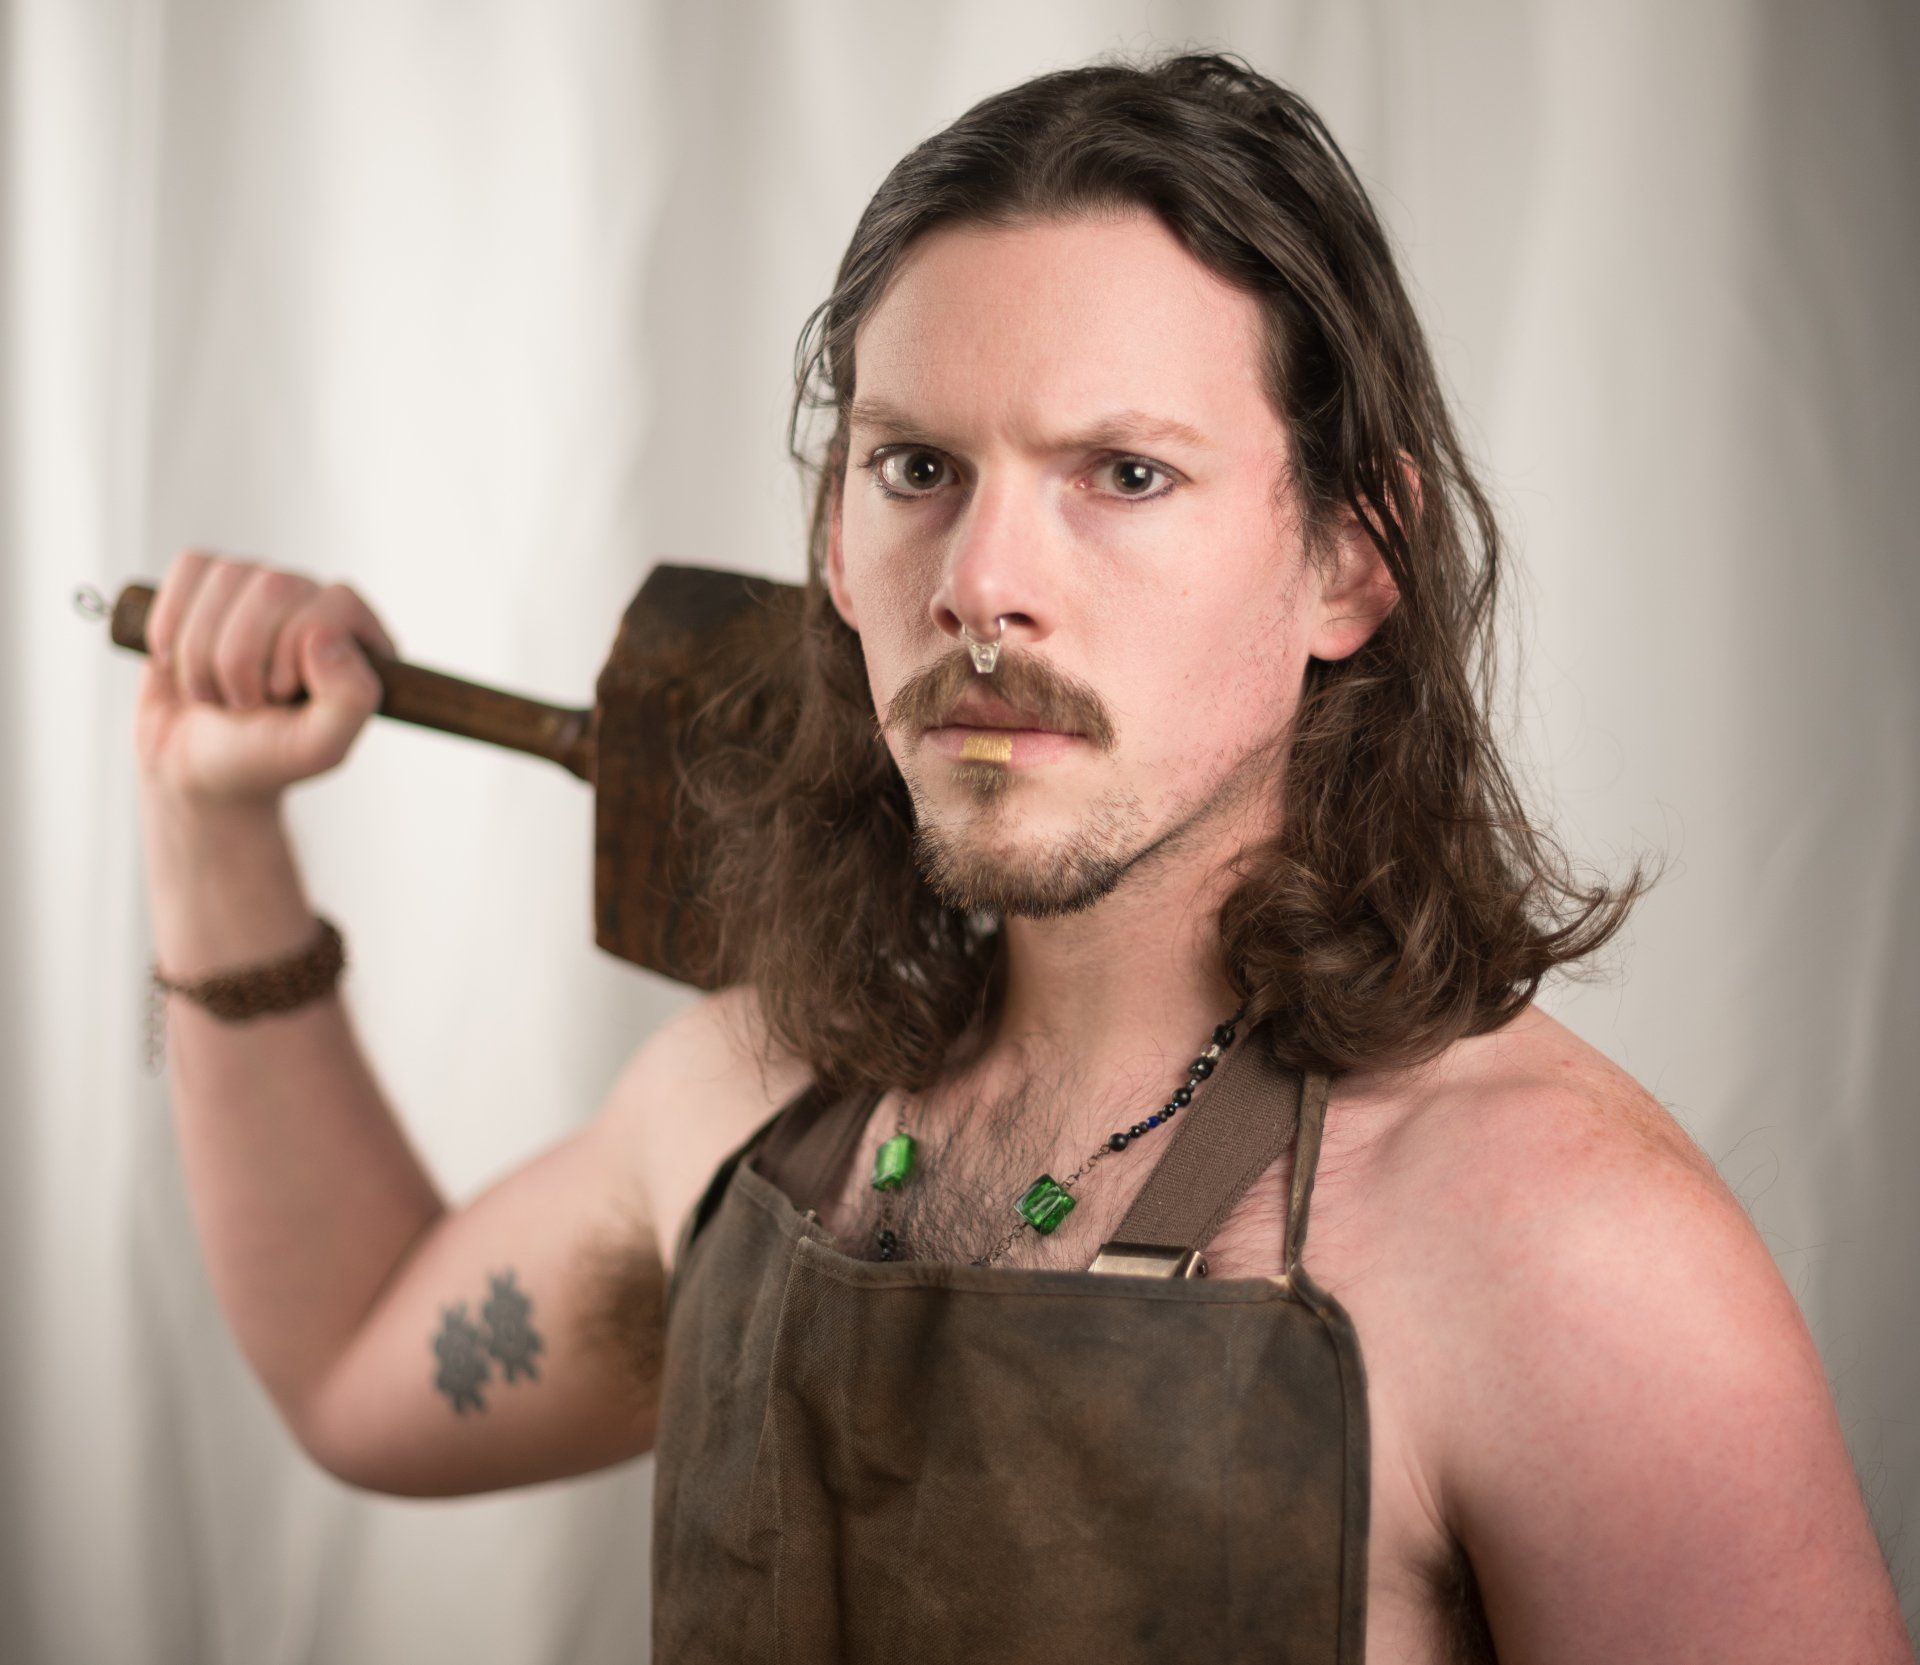 A shirtless man in an apron is holding a large hammer over his shoulder,  representing Hephaestus.